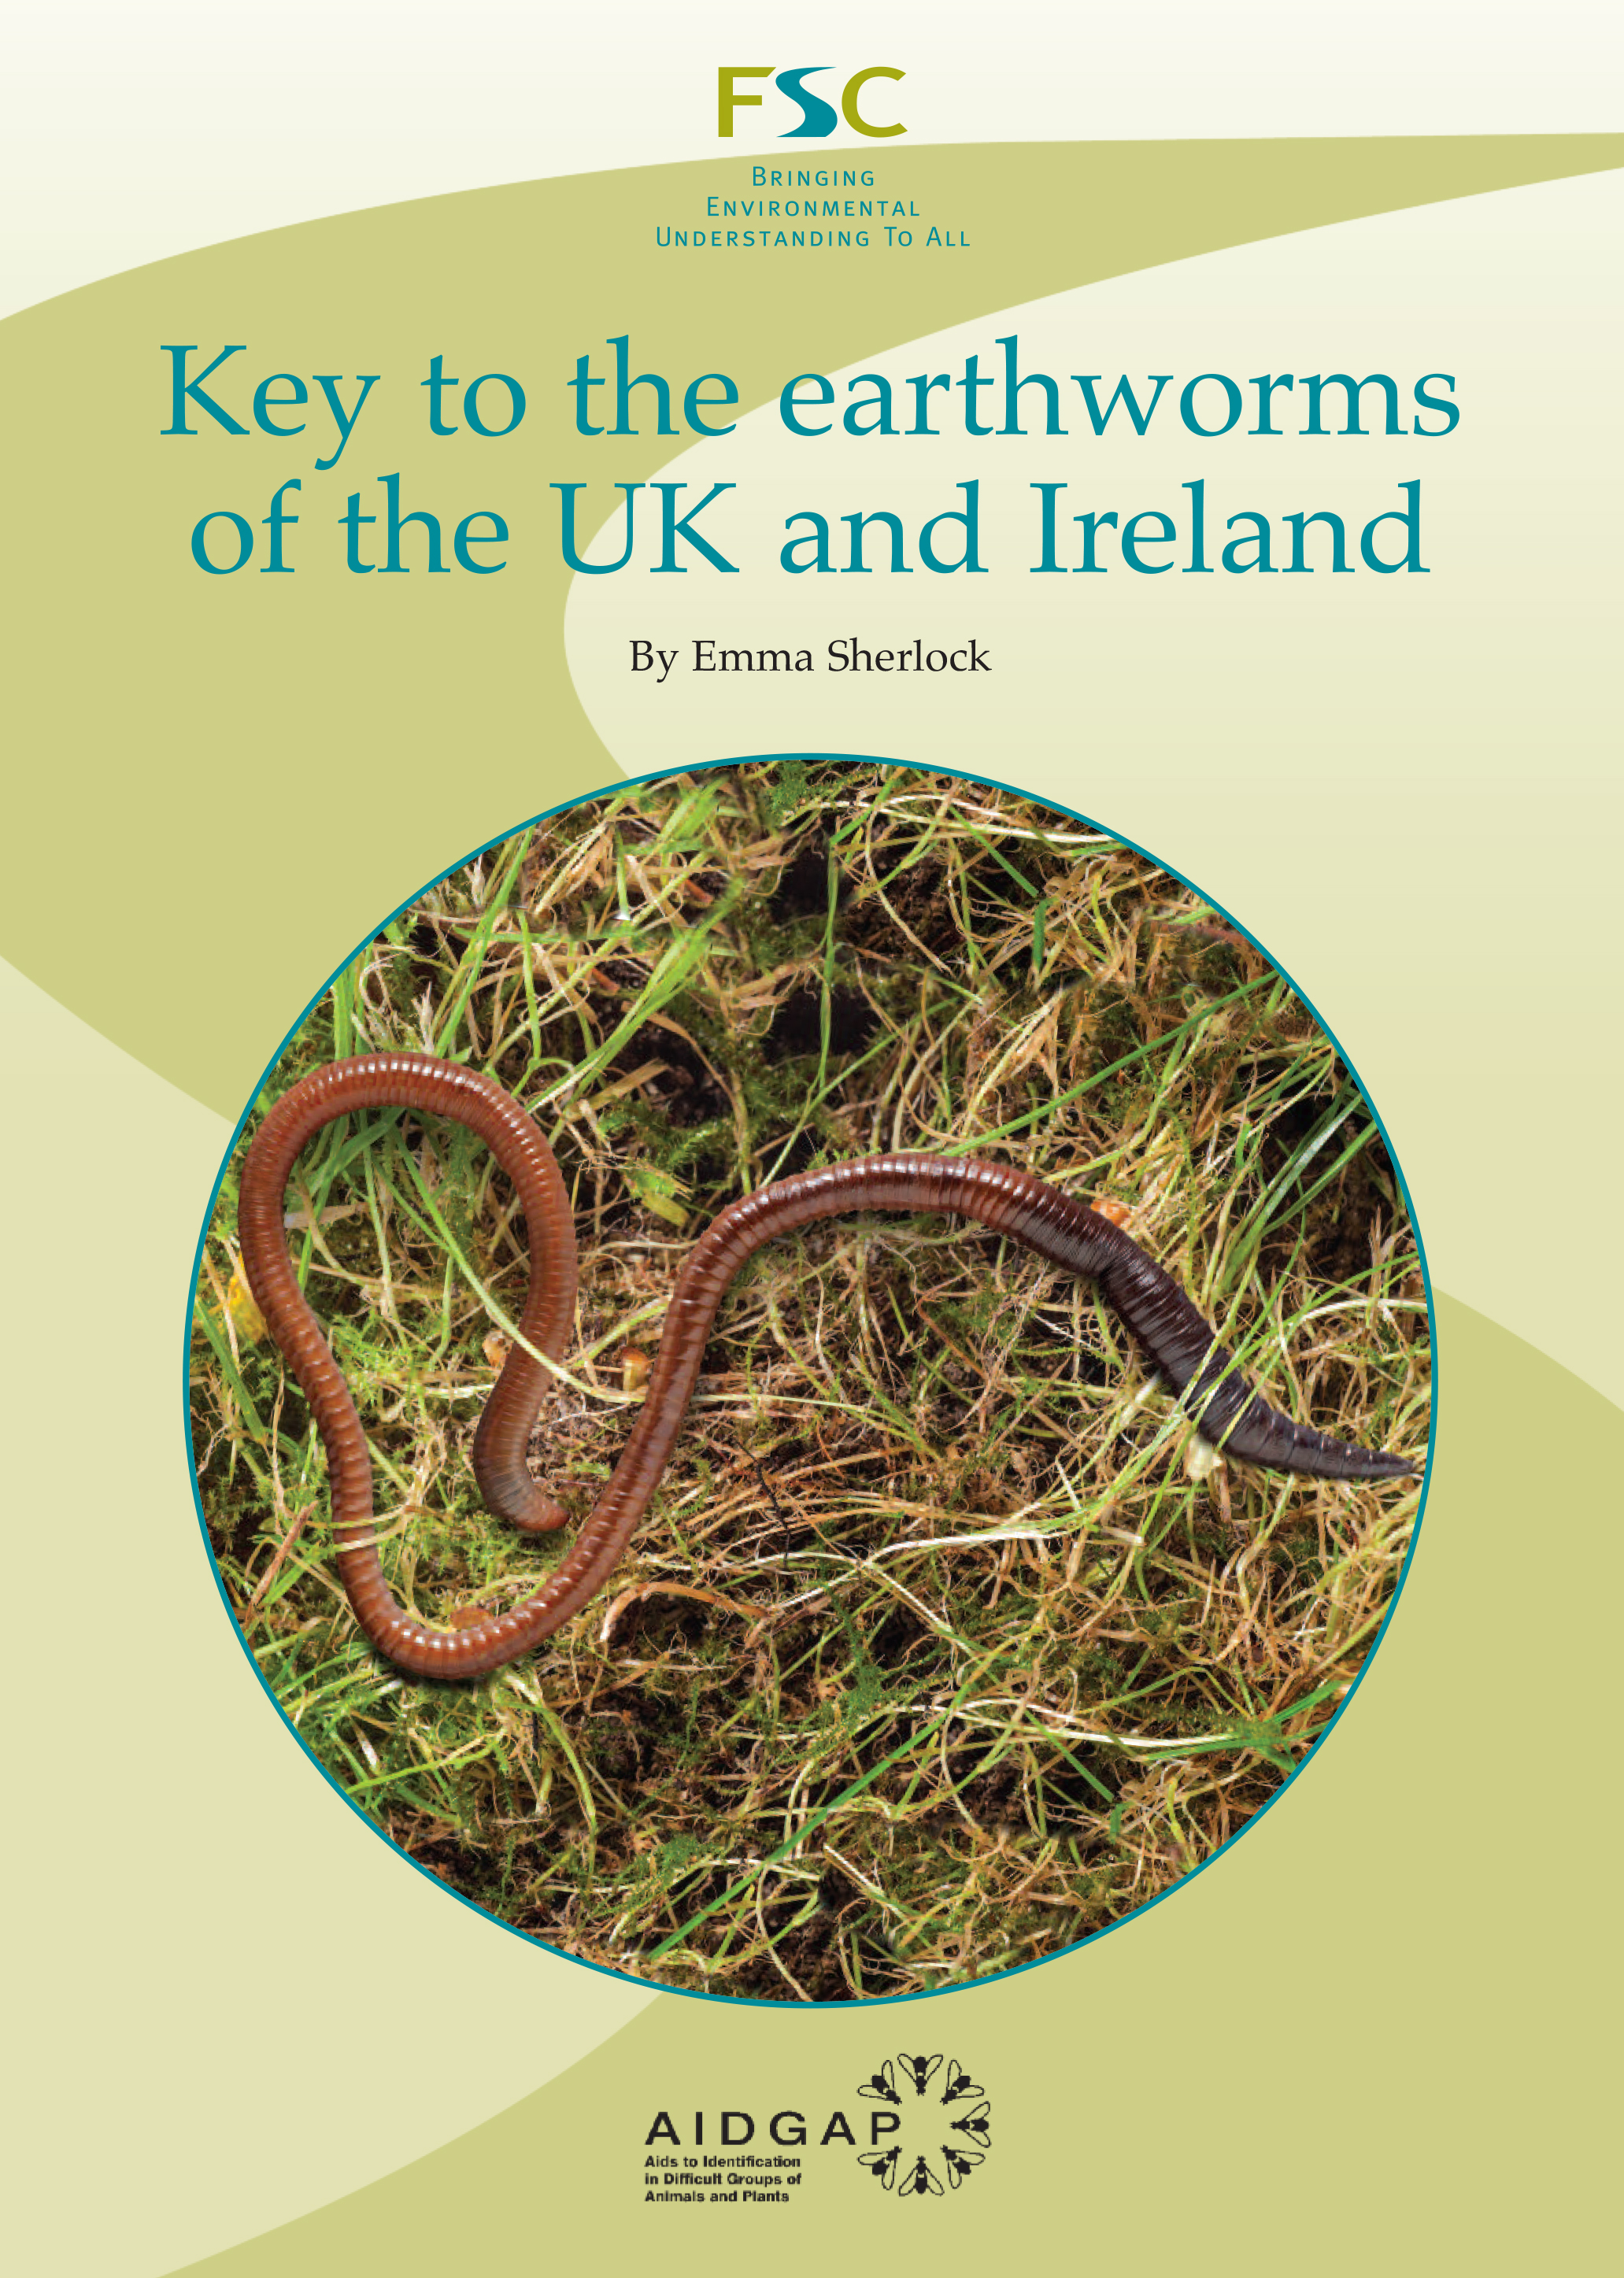 Cover of the second ed of the earthworm ID guide